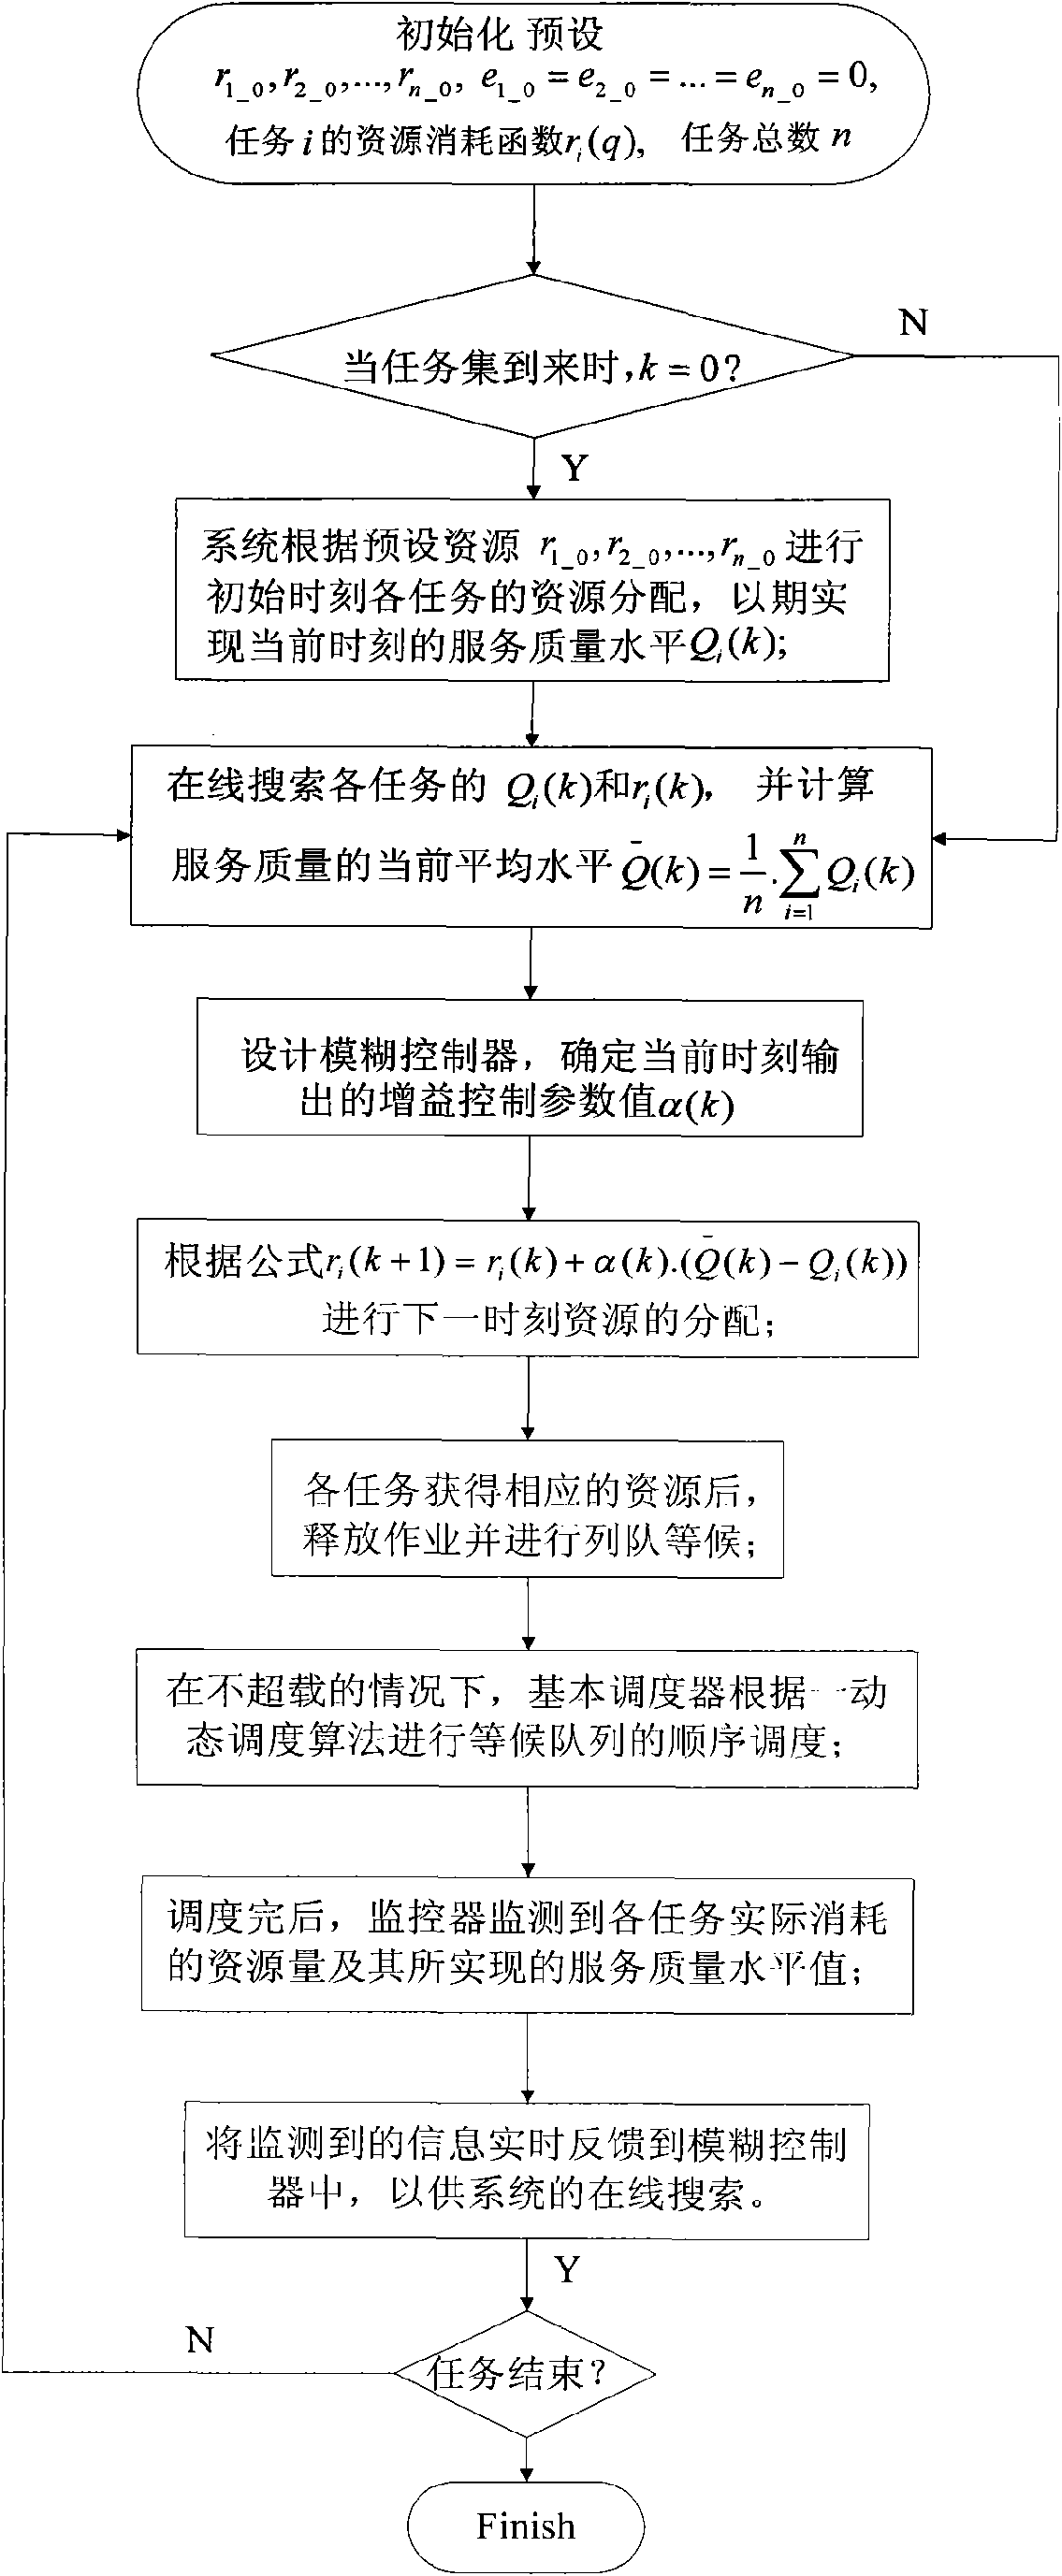 Control method for multi-robot system